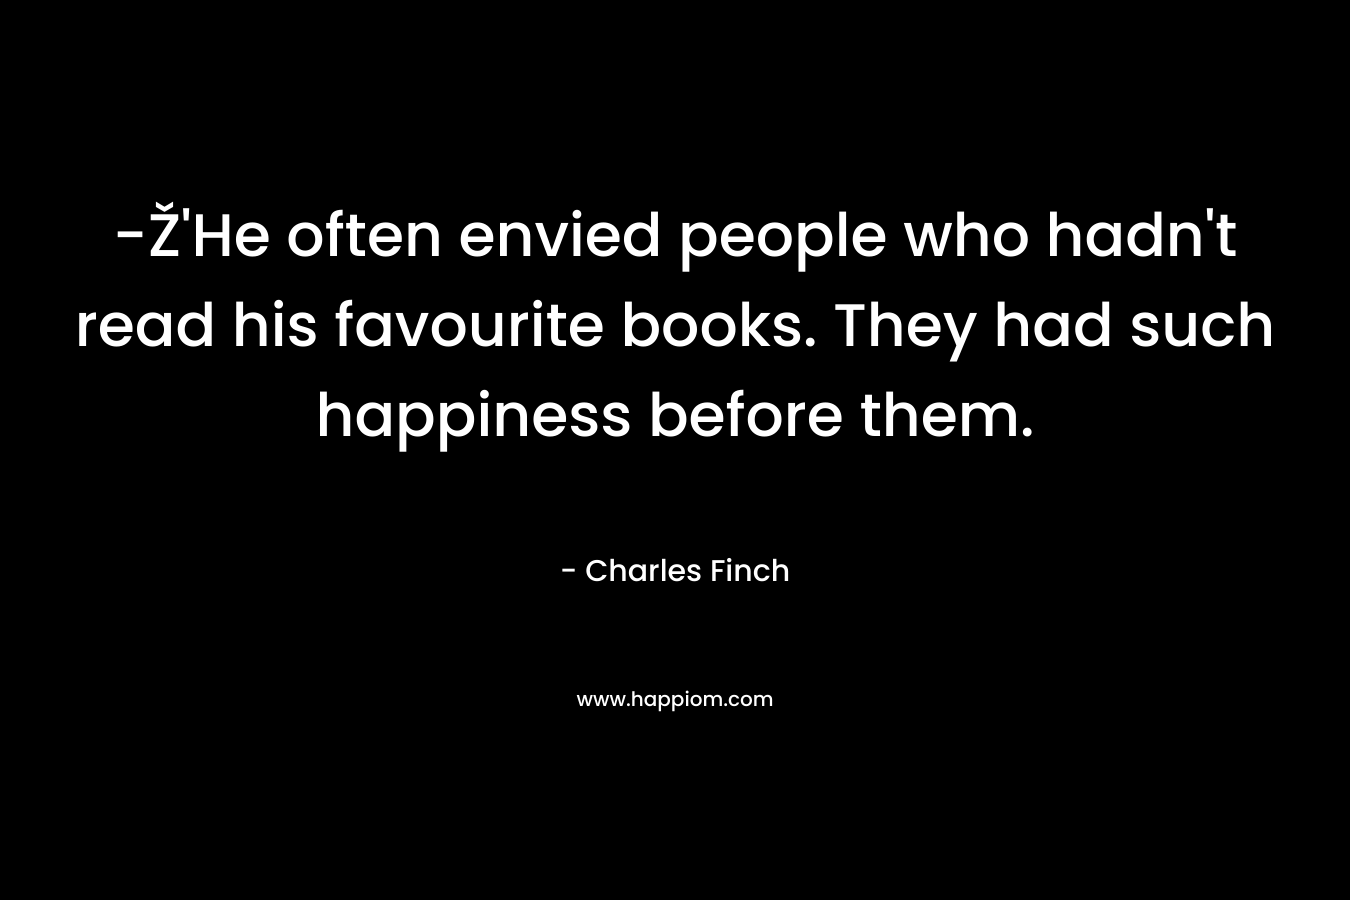 -Ž'He often envied people who hadn't read his favourite books. They had such happiness before them.